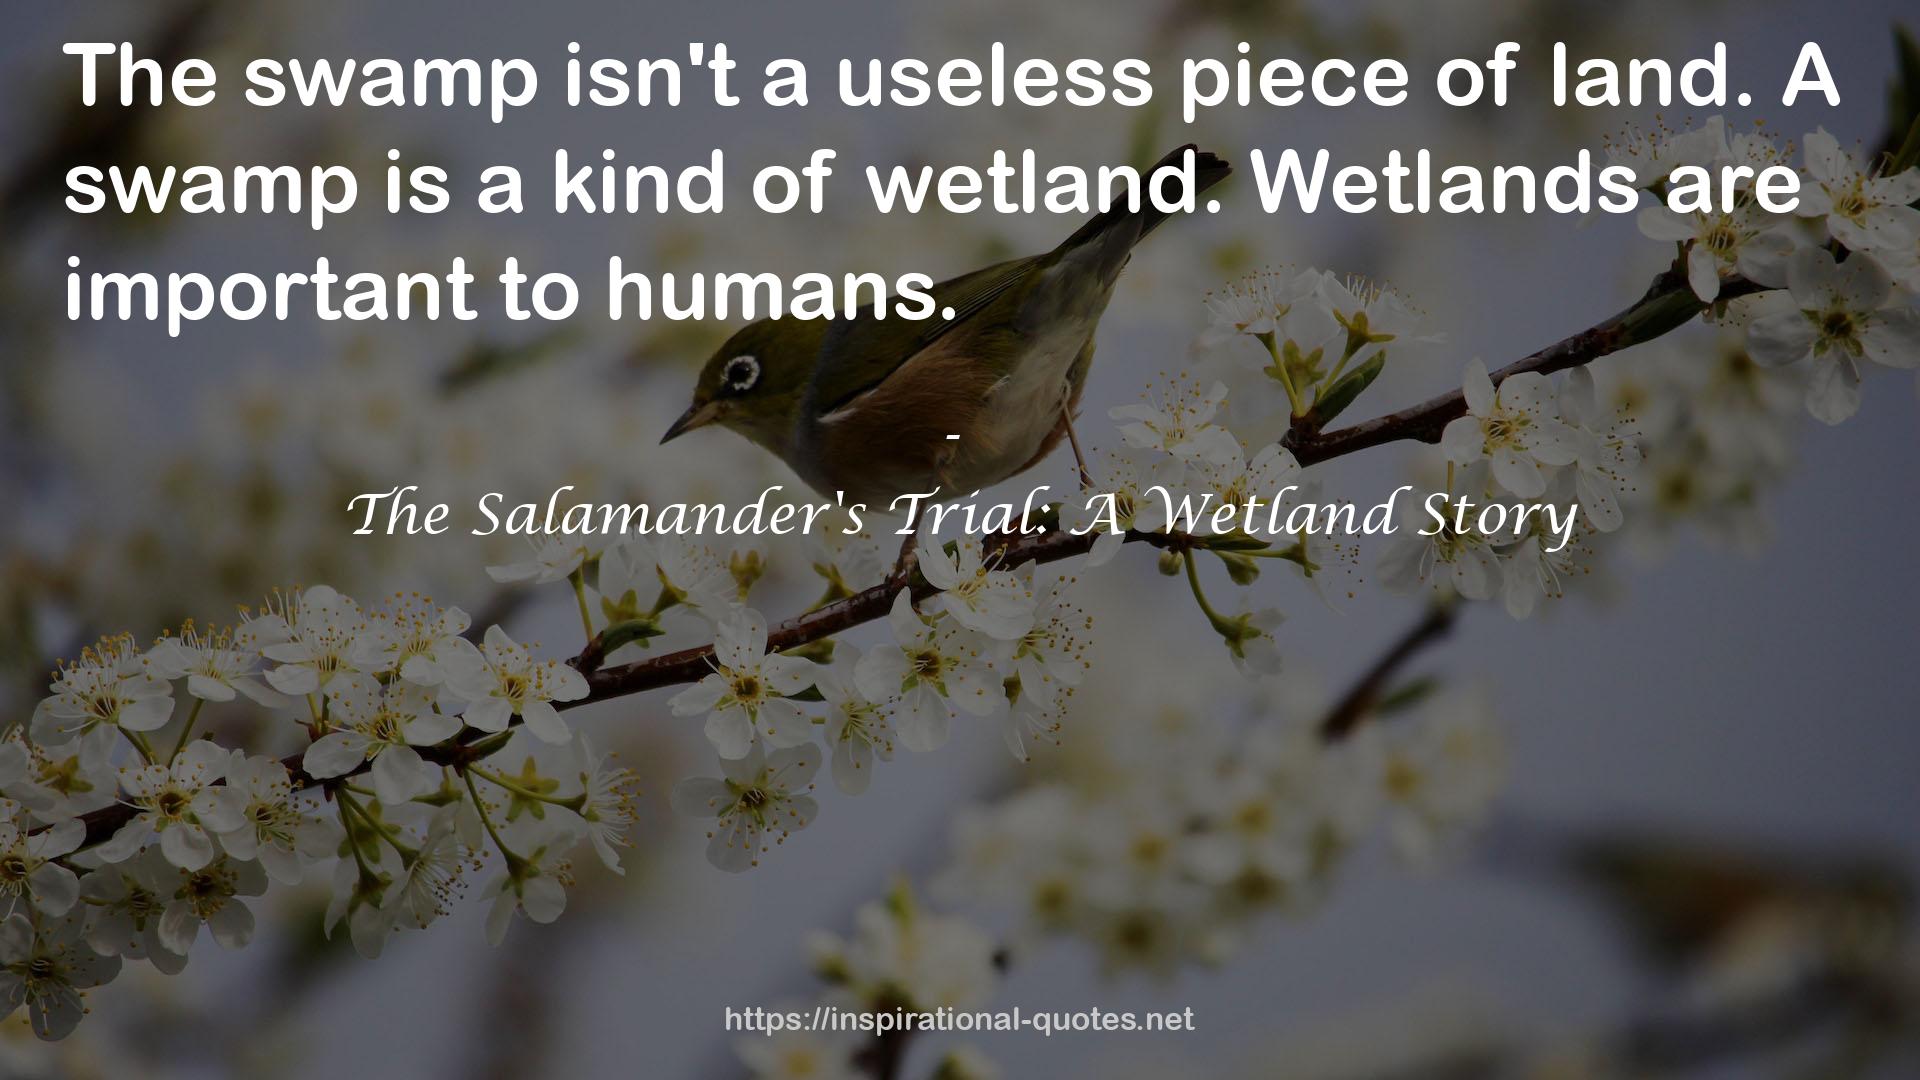 The Salamander's Trial: A Wetland Story QUOTES